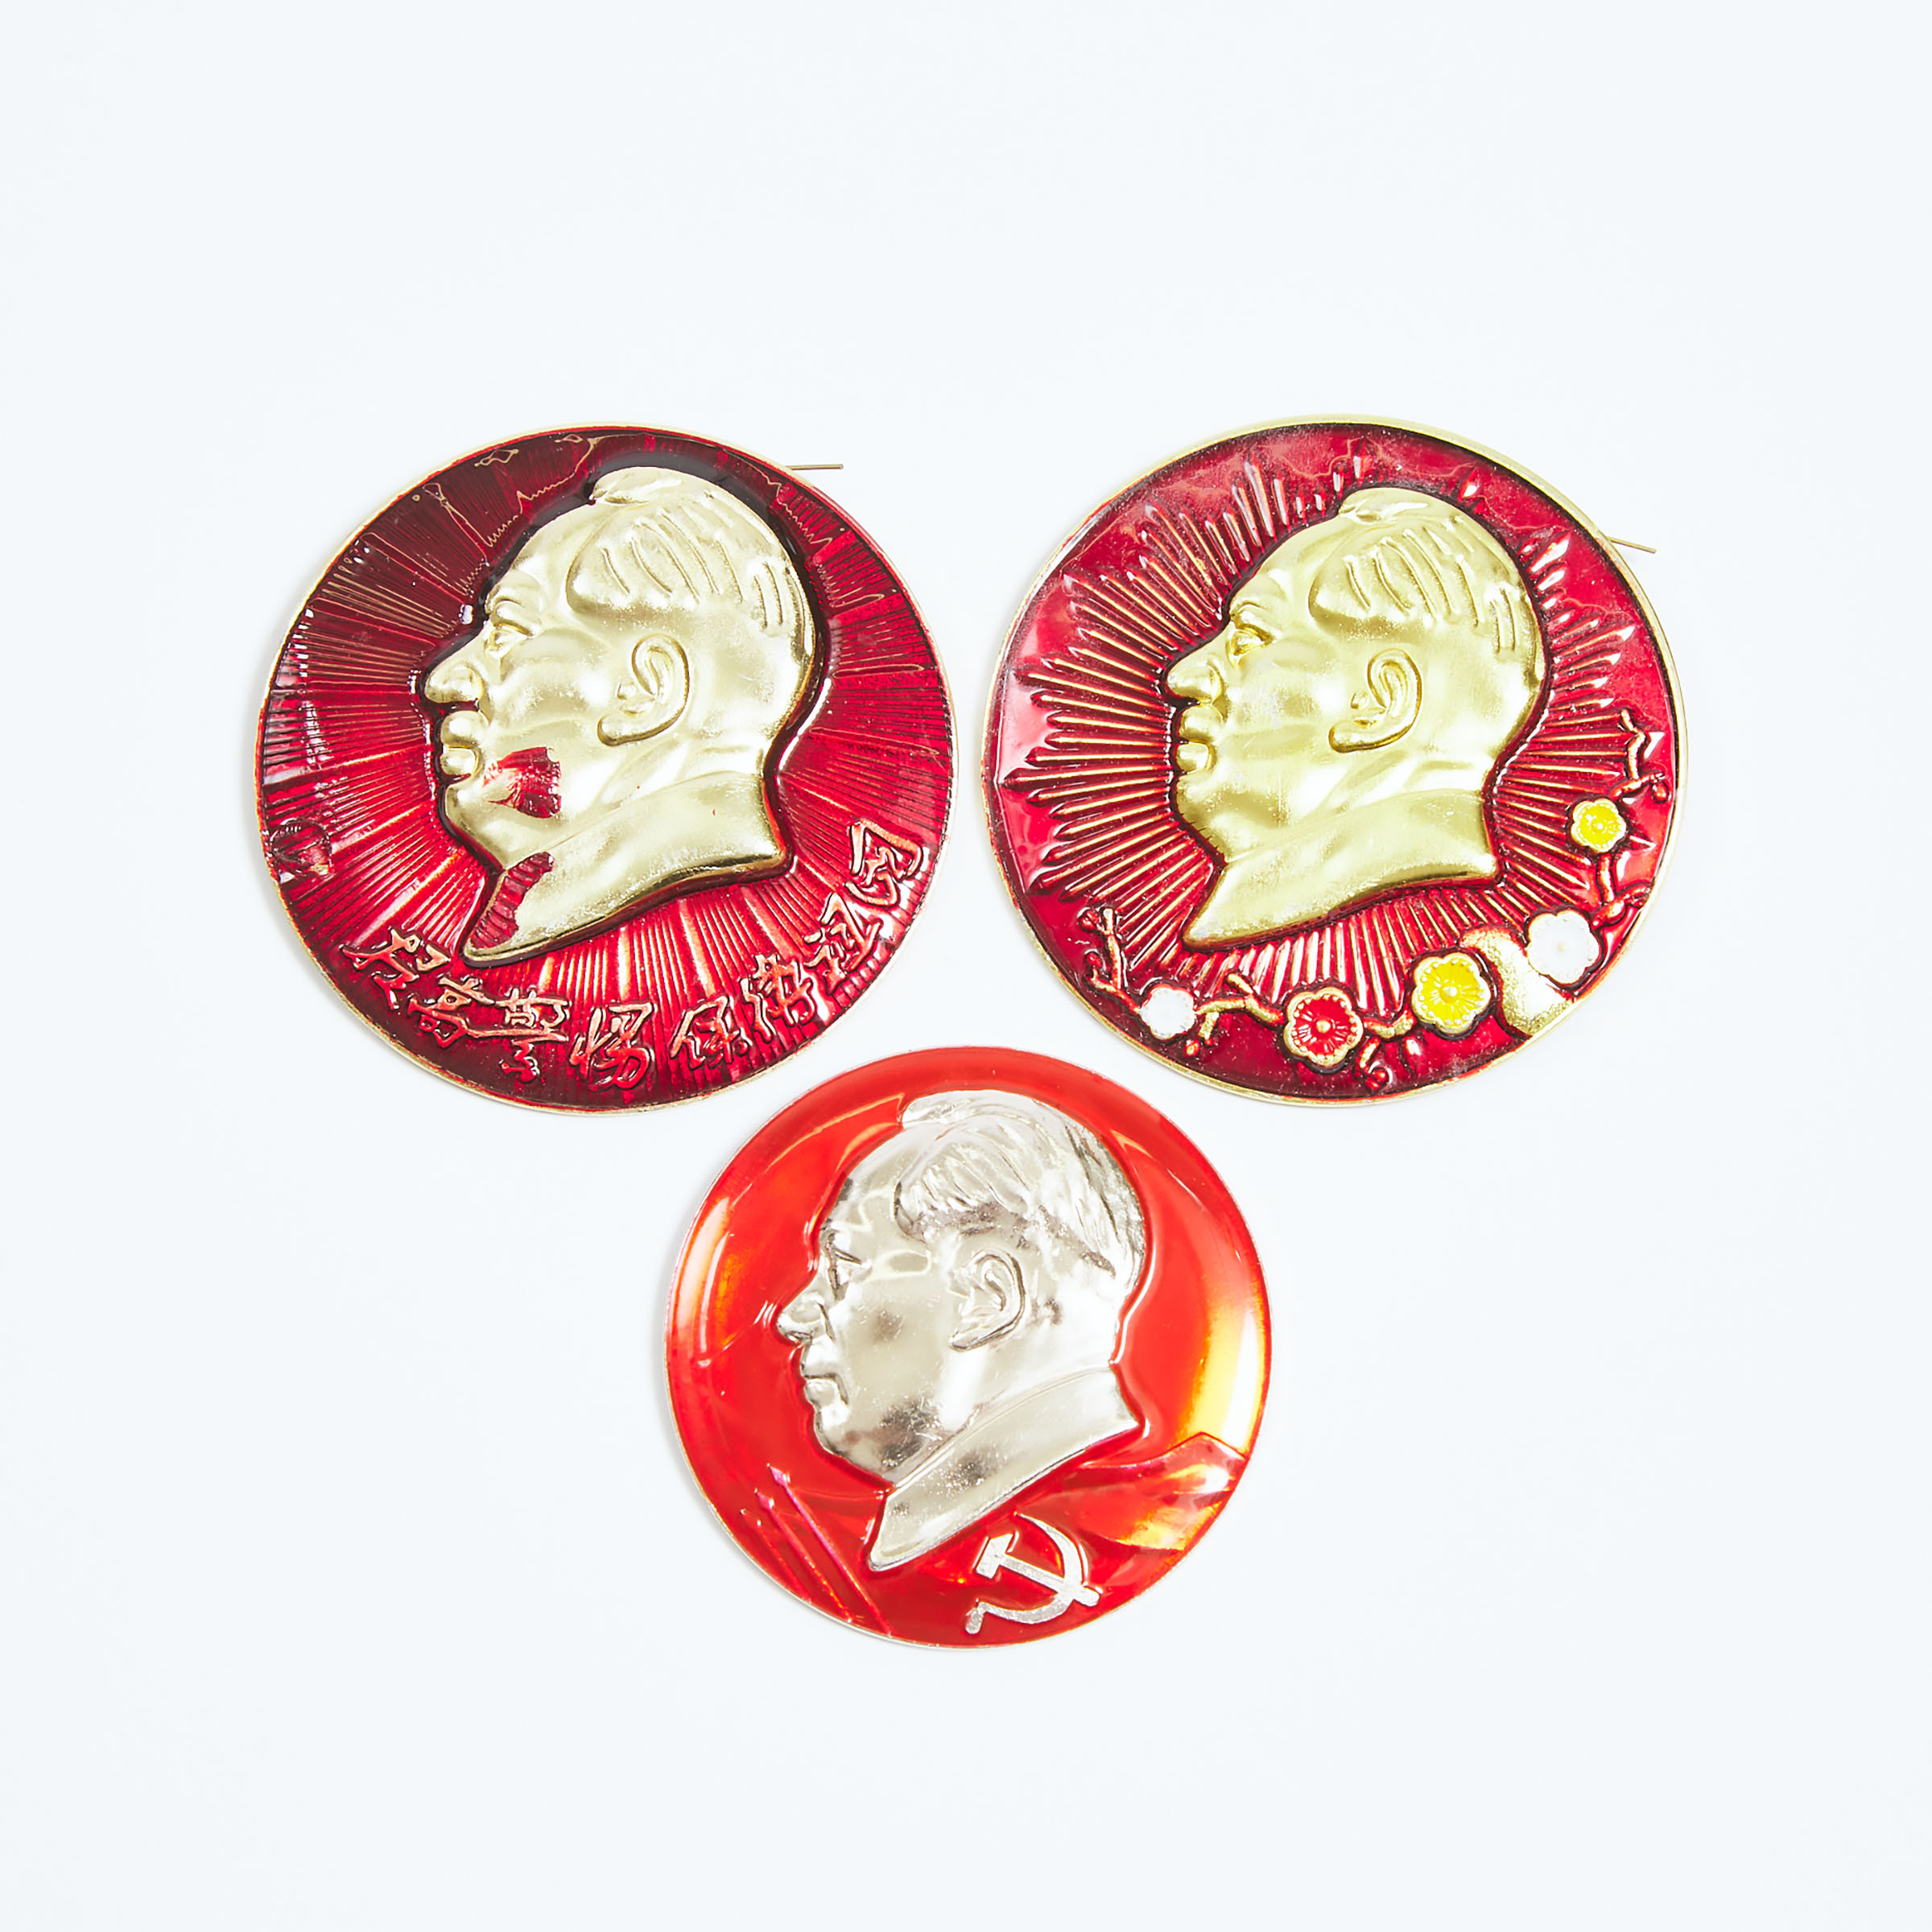 Two Large and Rare Chairman Mao 3abea3